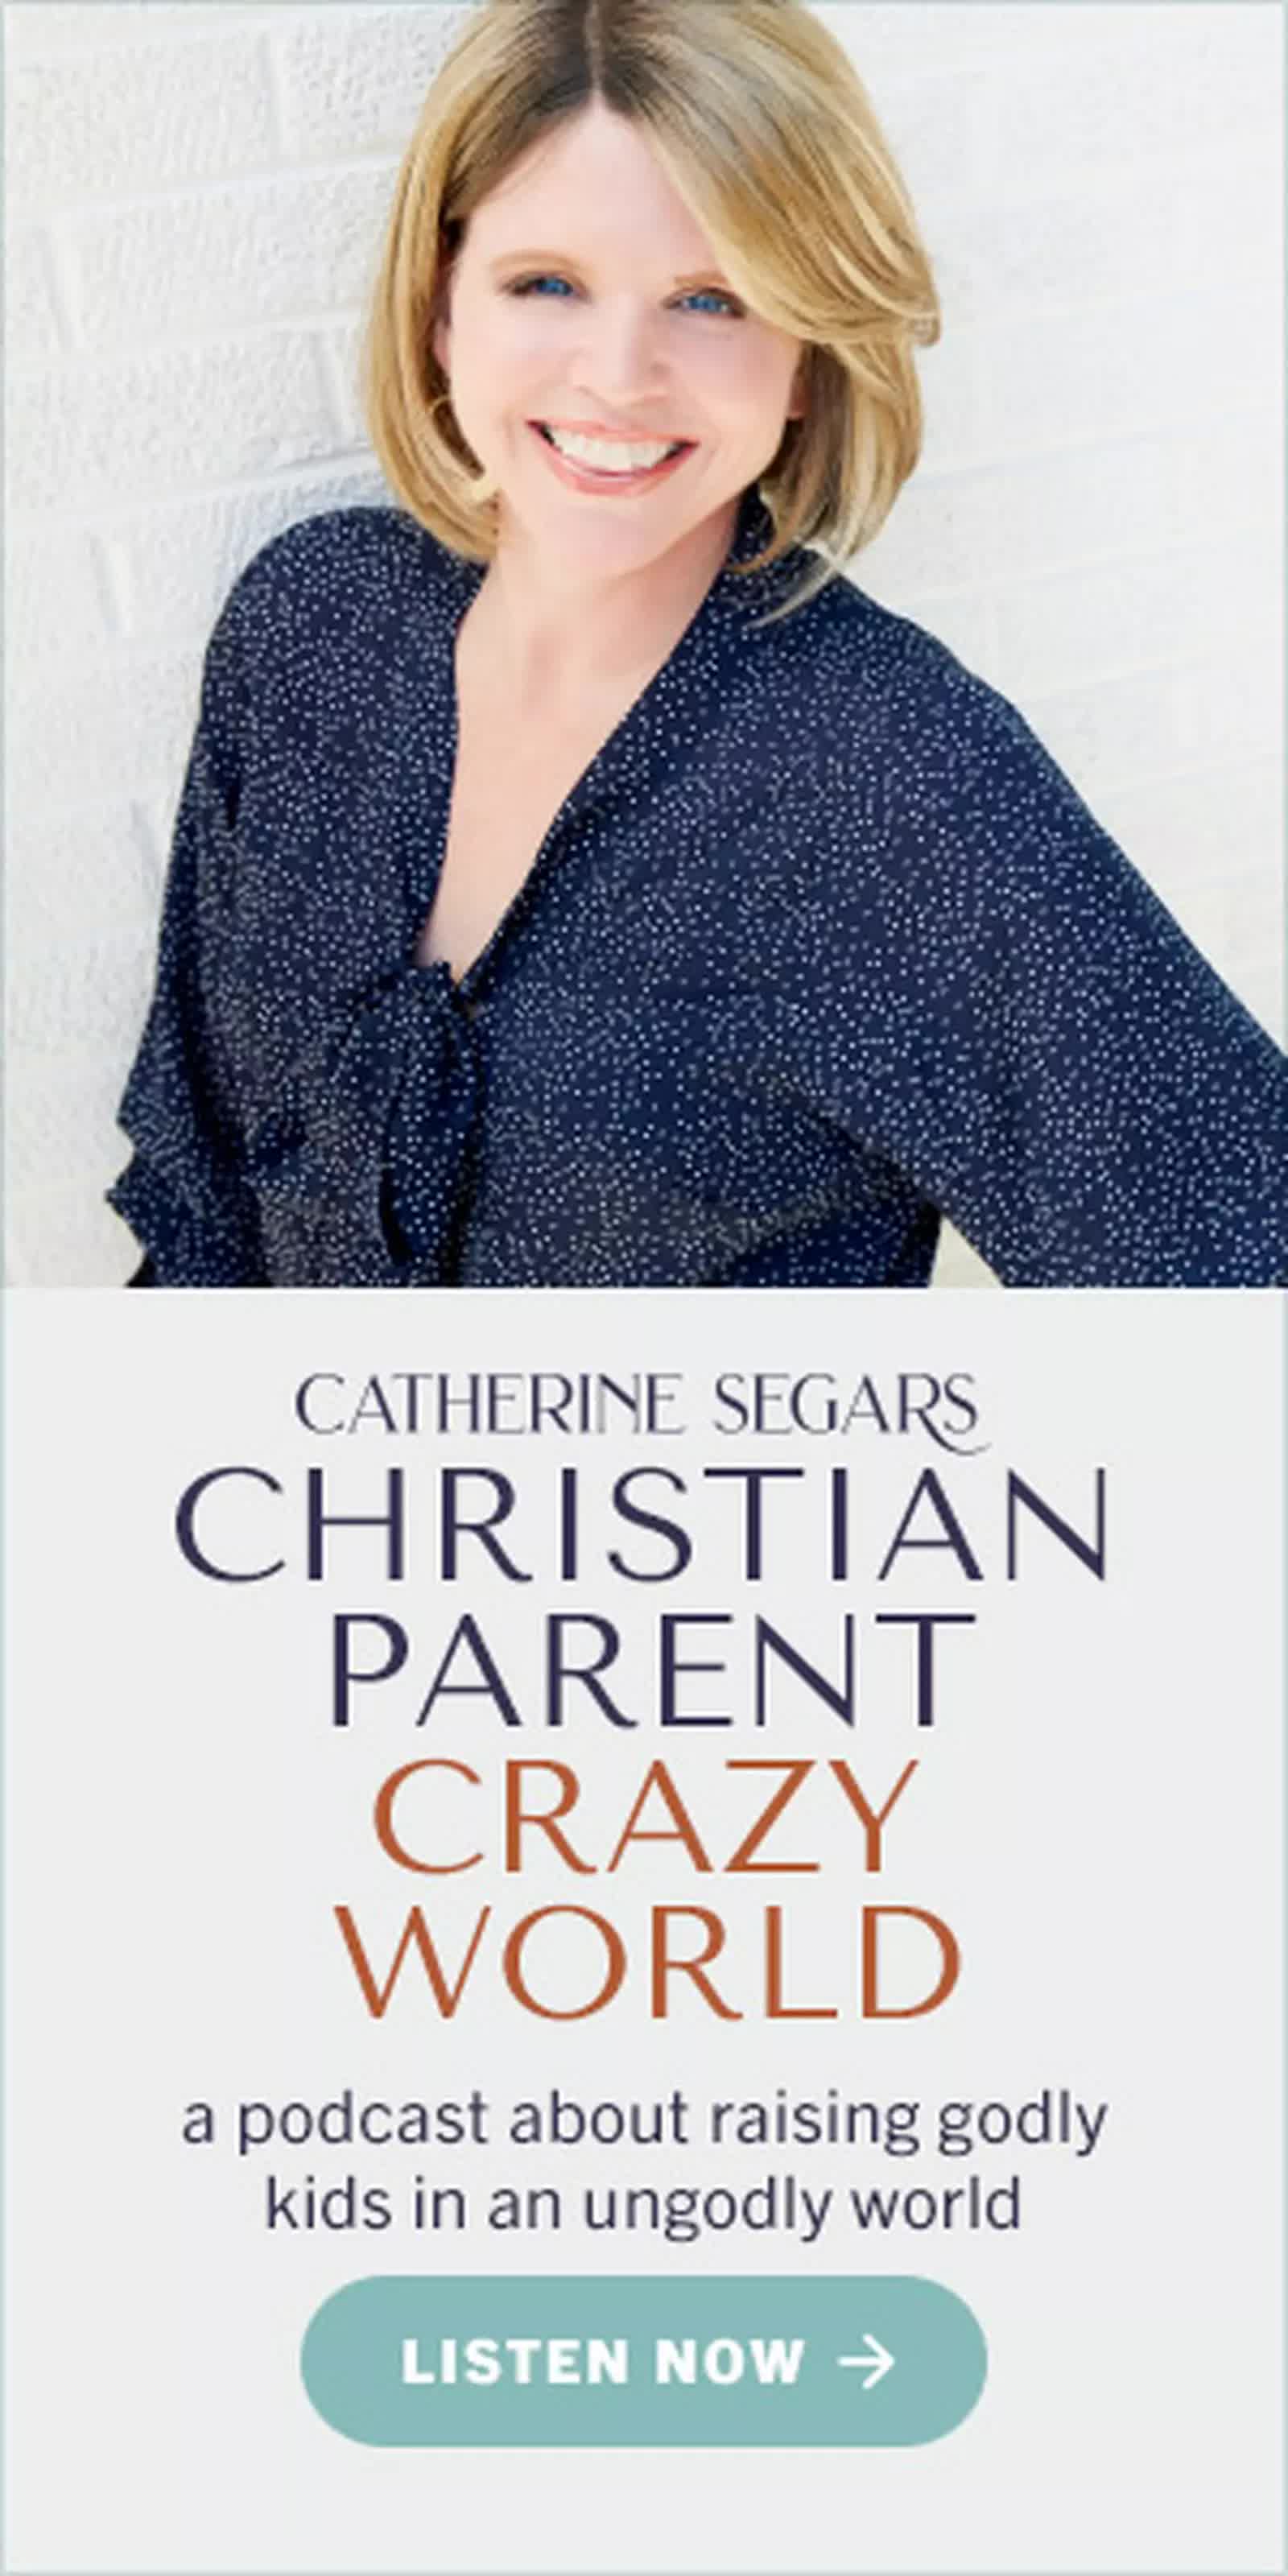 This is an ad banner for the podcast Christian Parent, Crazy World